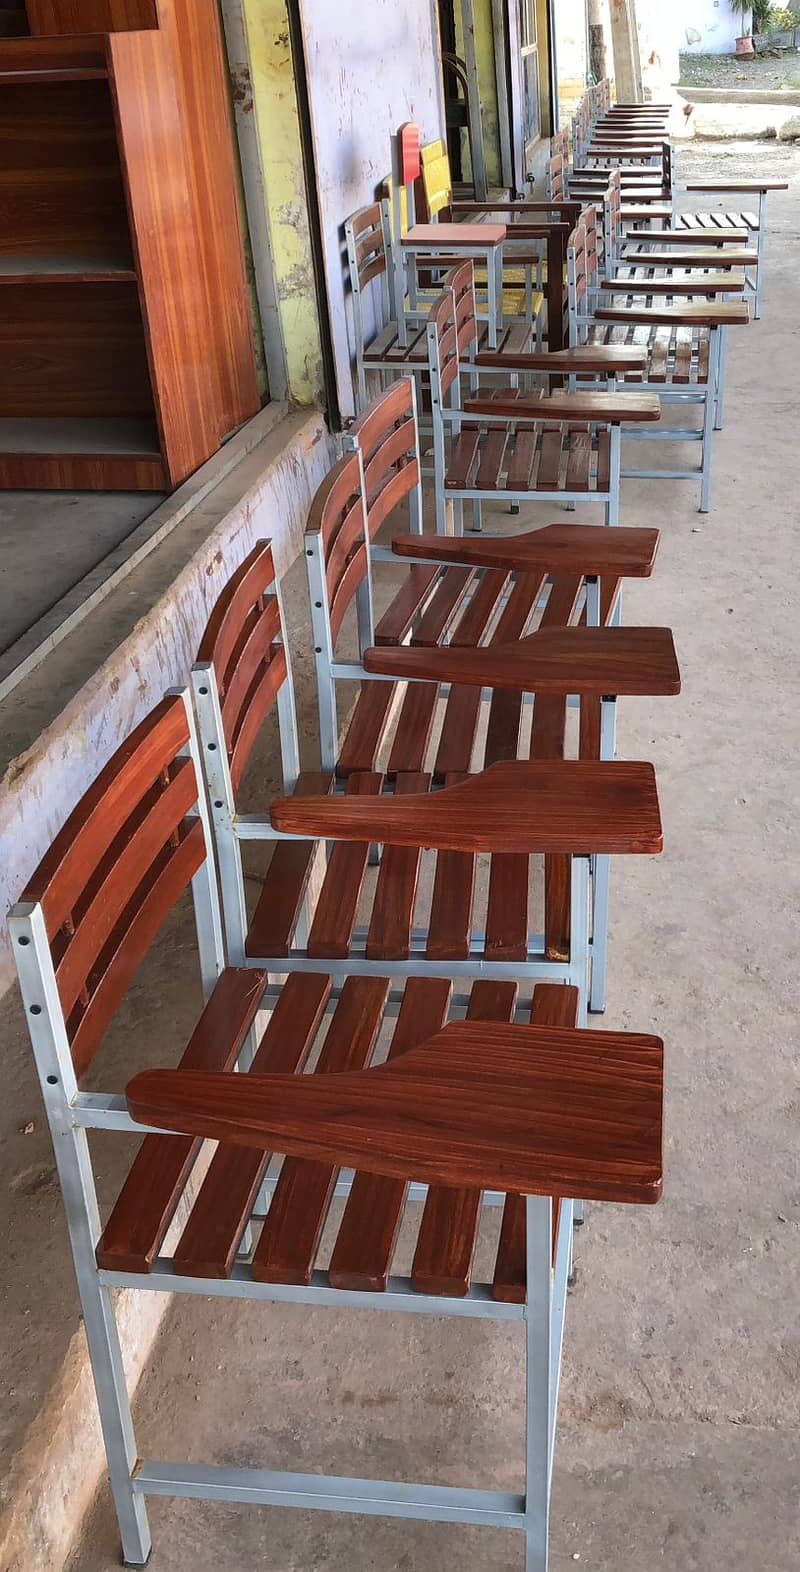 school chairs / chairs / college chairs / desk / bench / office table 11